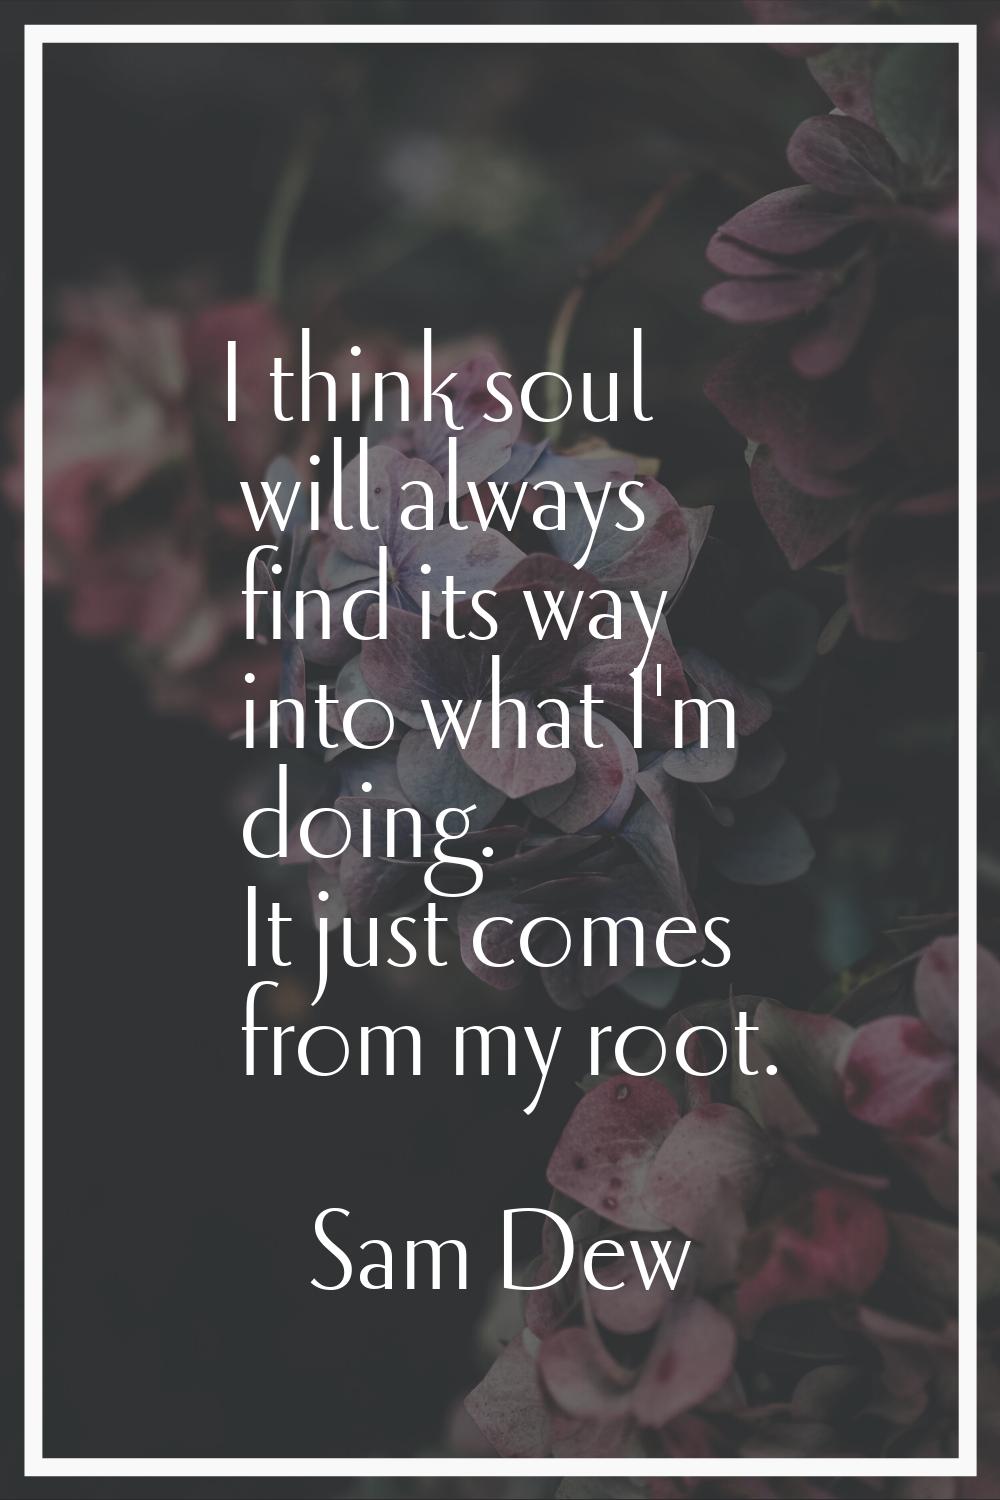 I think soul will always find its way into what I'm doing. It just comes from my root.